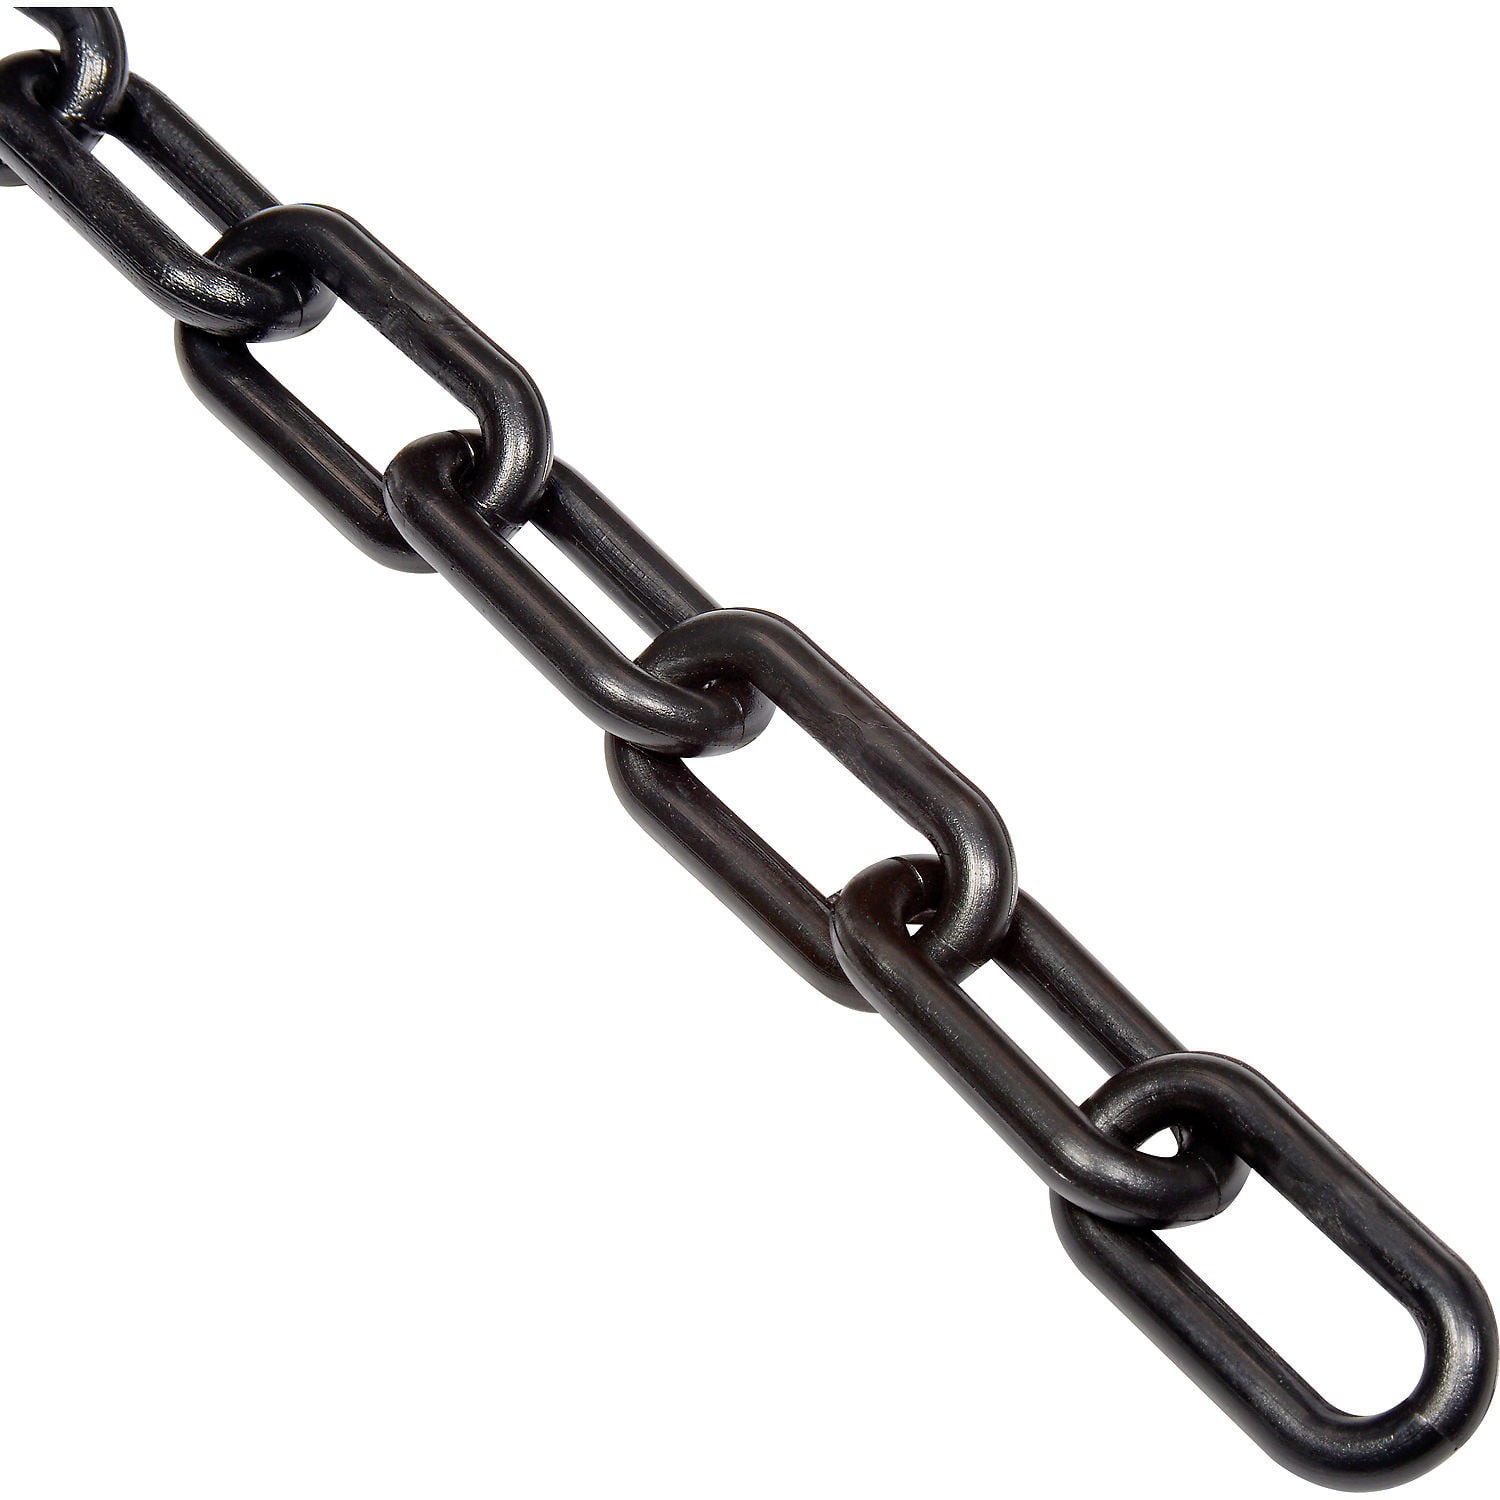 65 Feet Black Plastic Chain Parking Barrier and Delineator Post with Base and Zip Ties Plastic Safety Barrier Chain for Crowd Control 8 S-Hooks Safety Security Chain with 6 Carabiner D Rings 